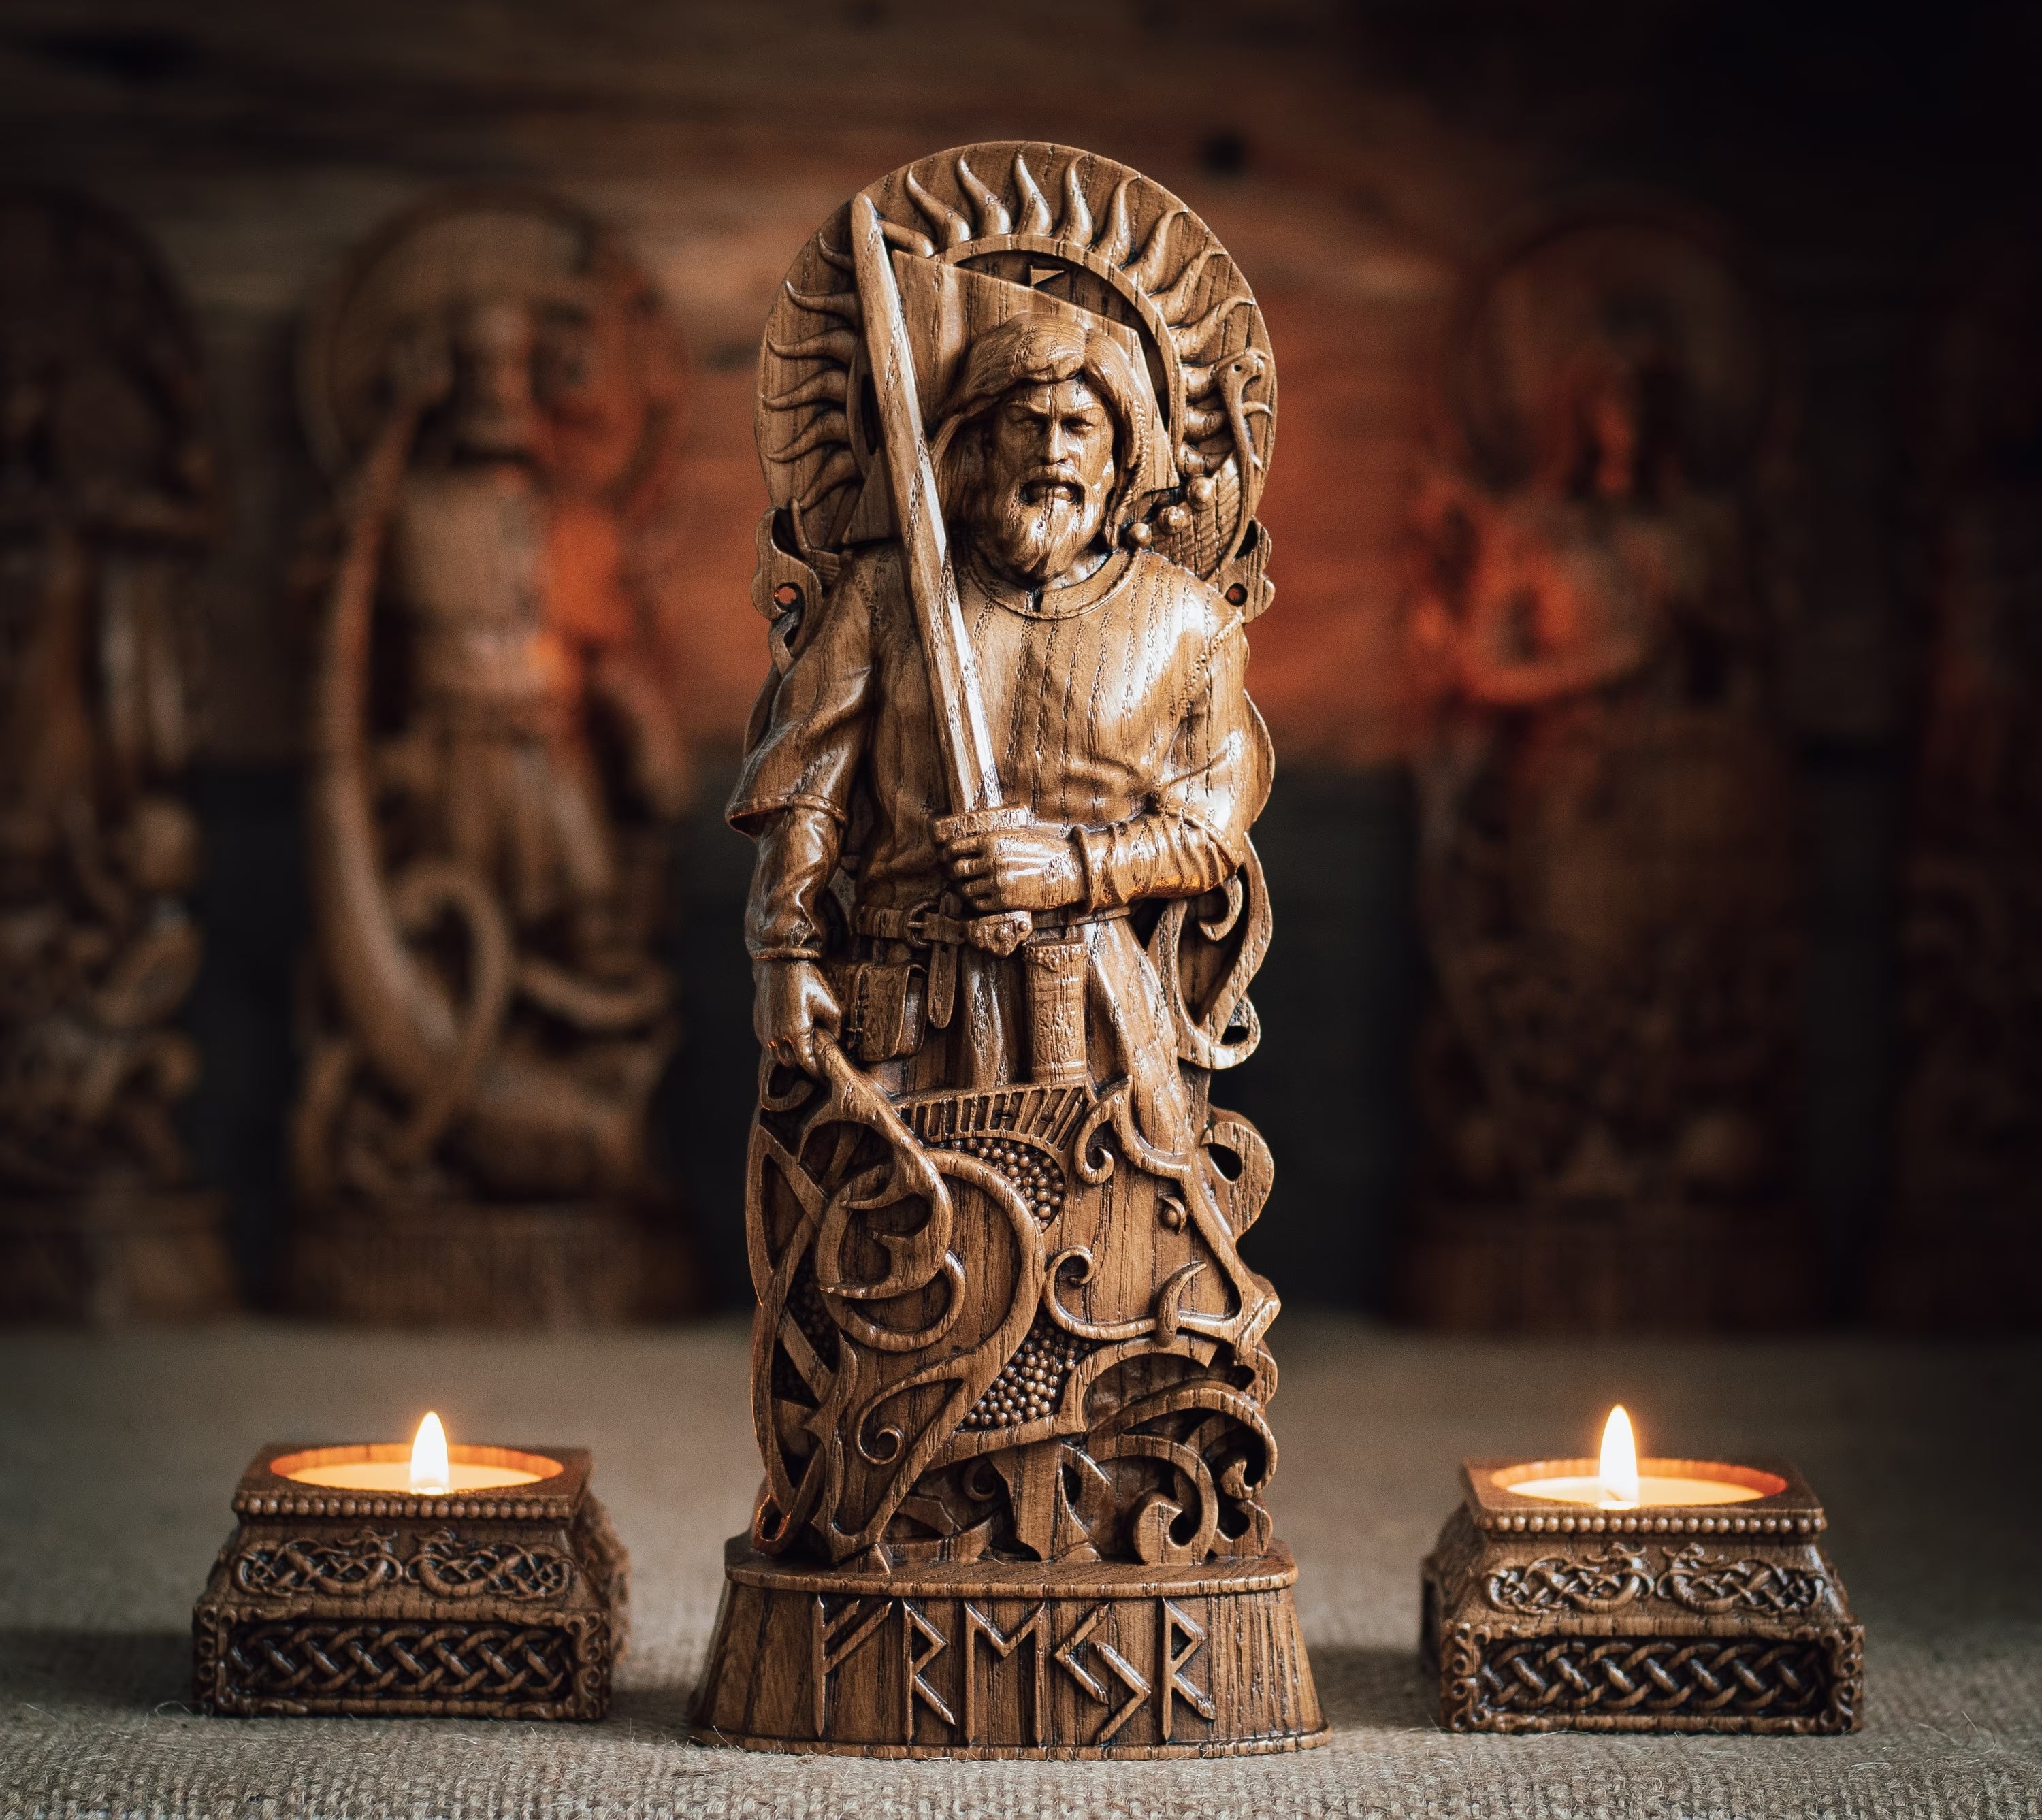 Illuminate moments with Freyr’s harvest candle